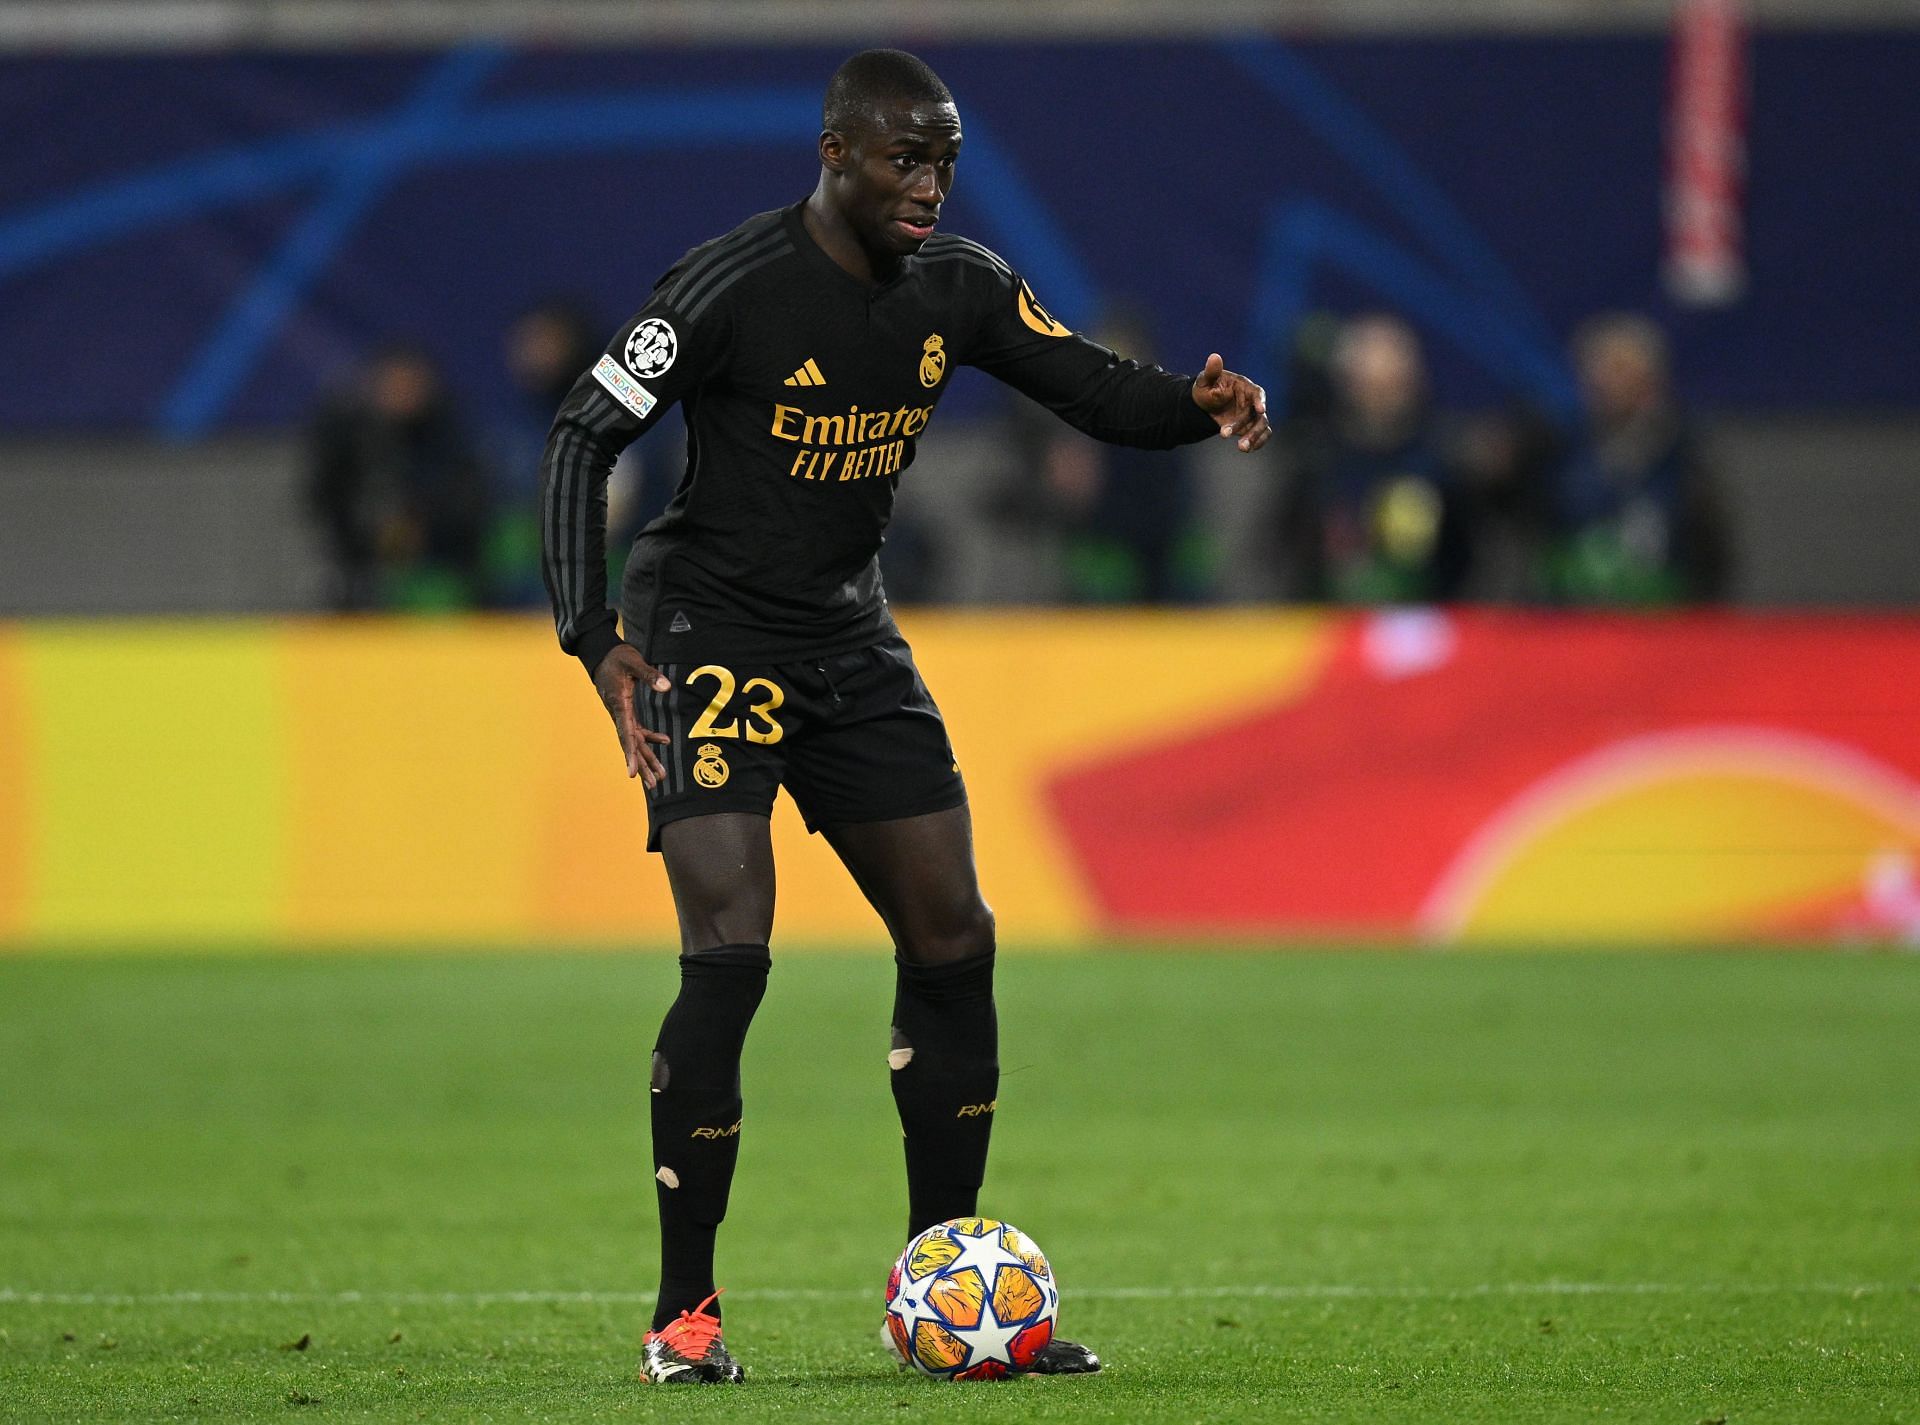 Ferland Mendy has done well this season at the Santiago Bernabeu